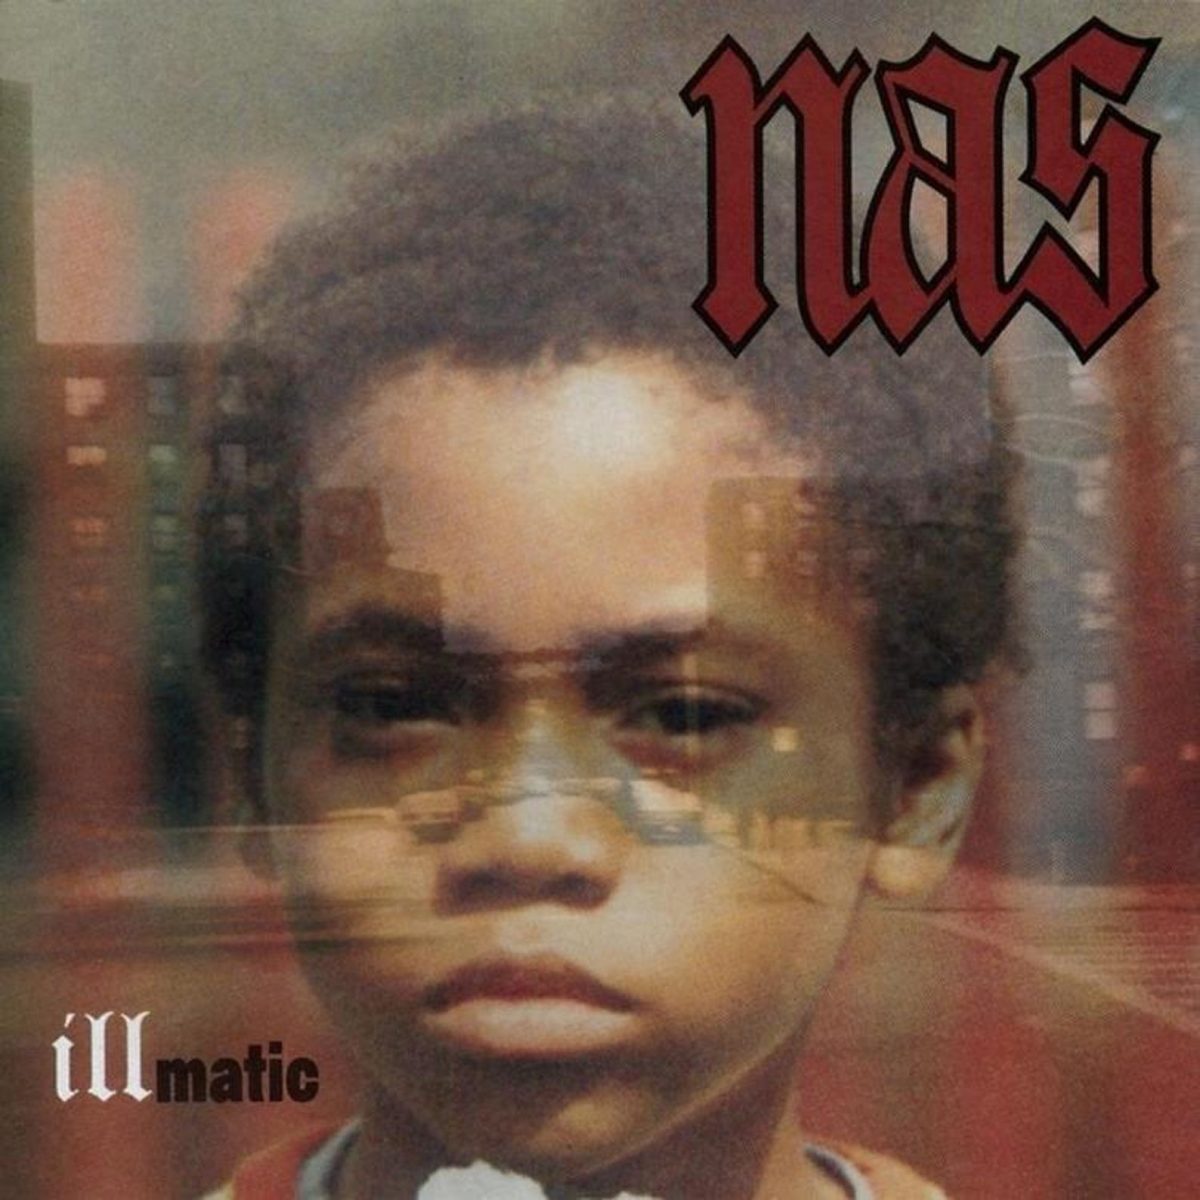 The+cover+for+Nas+debut+album+Illmatic%2C+released+in+1994.